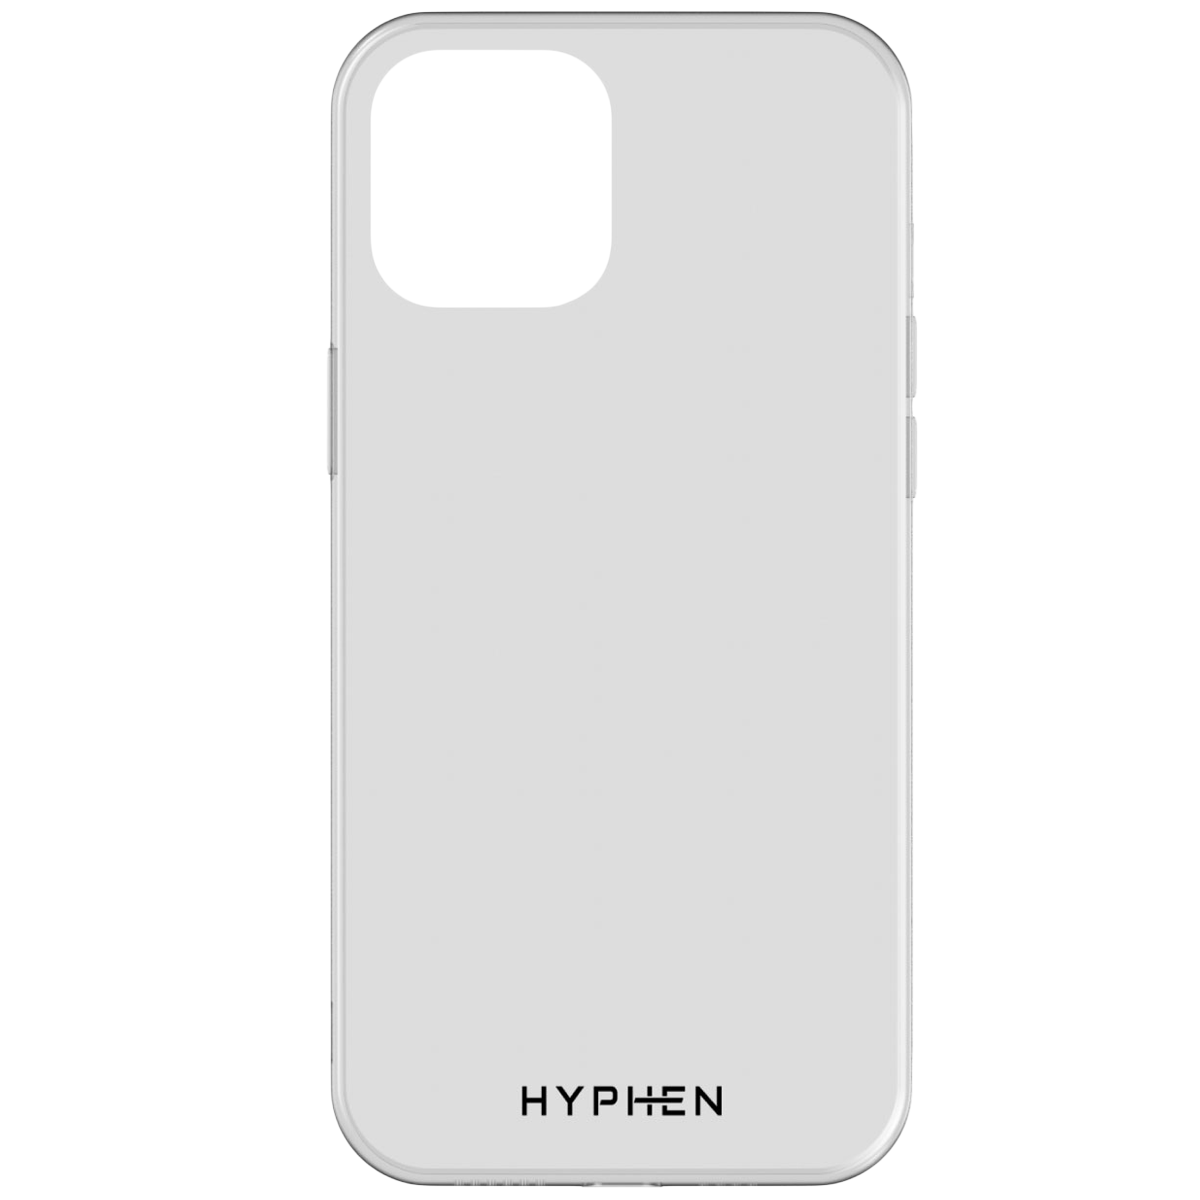 Hyphen TPU Back Case For iPhone 12 Pro Max (Compact and Flexible, HPC-CXII670510, Clear)_1